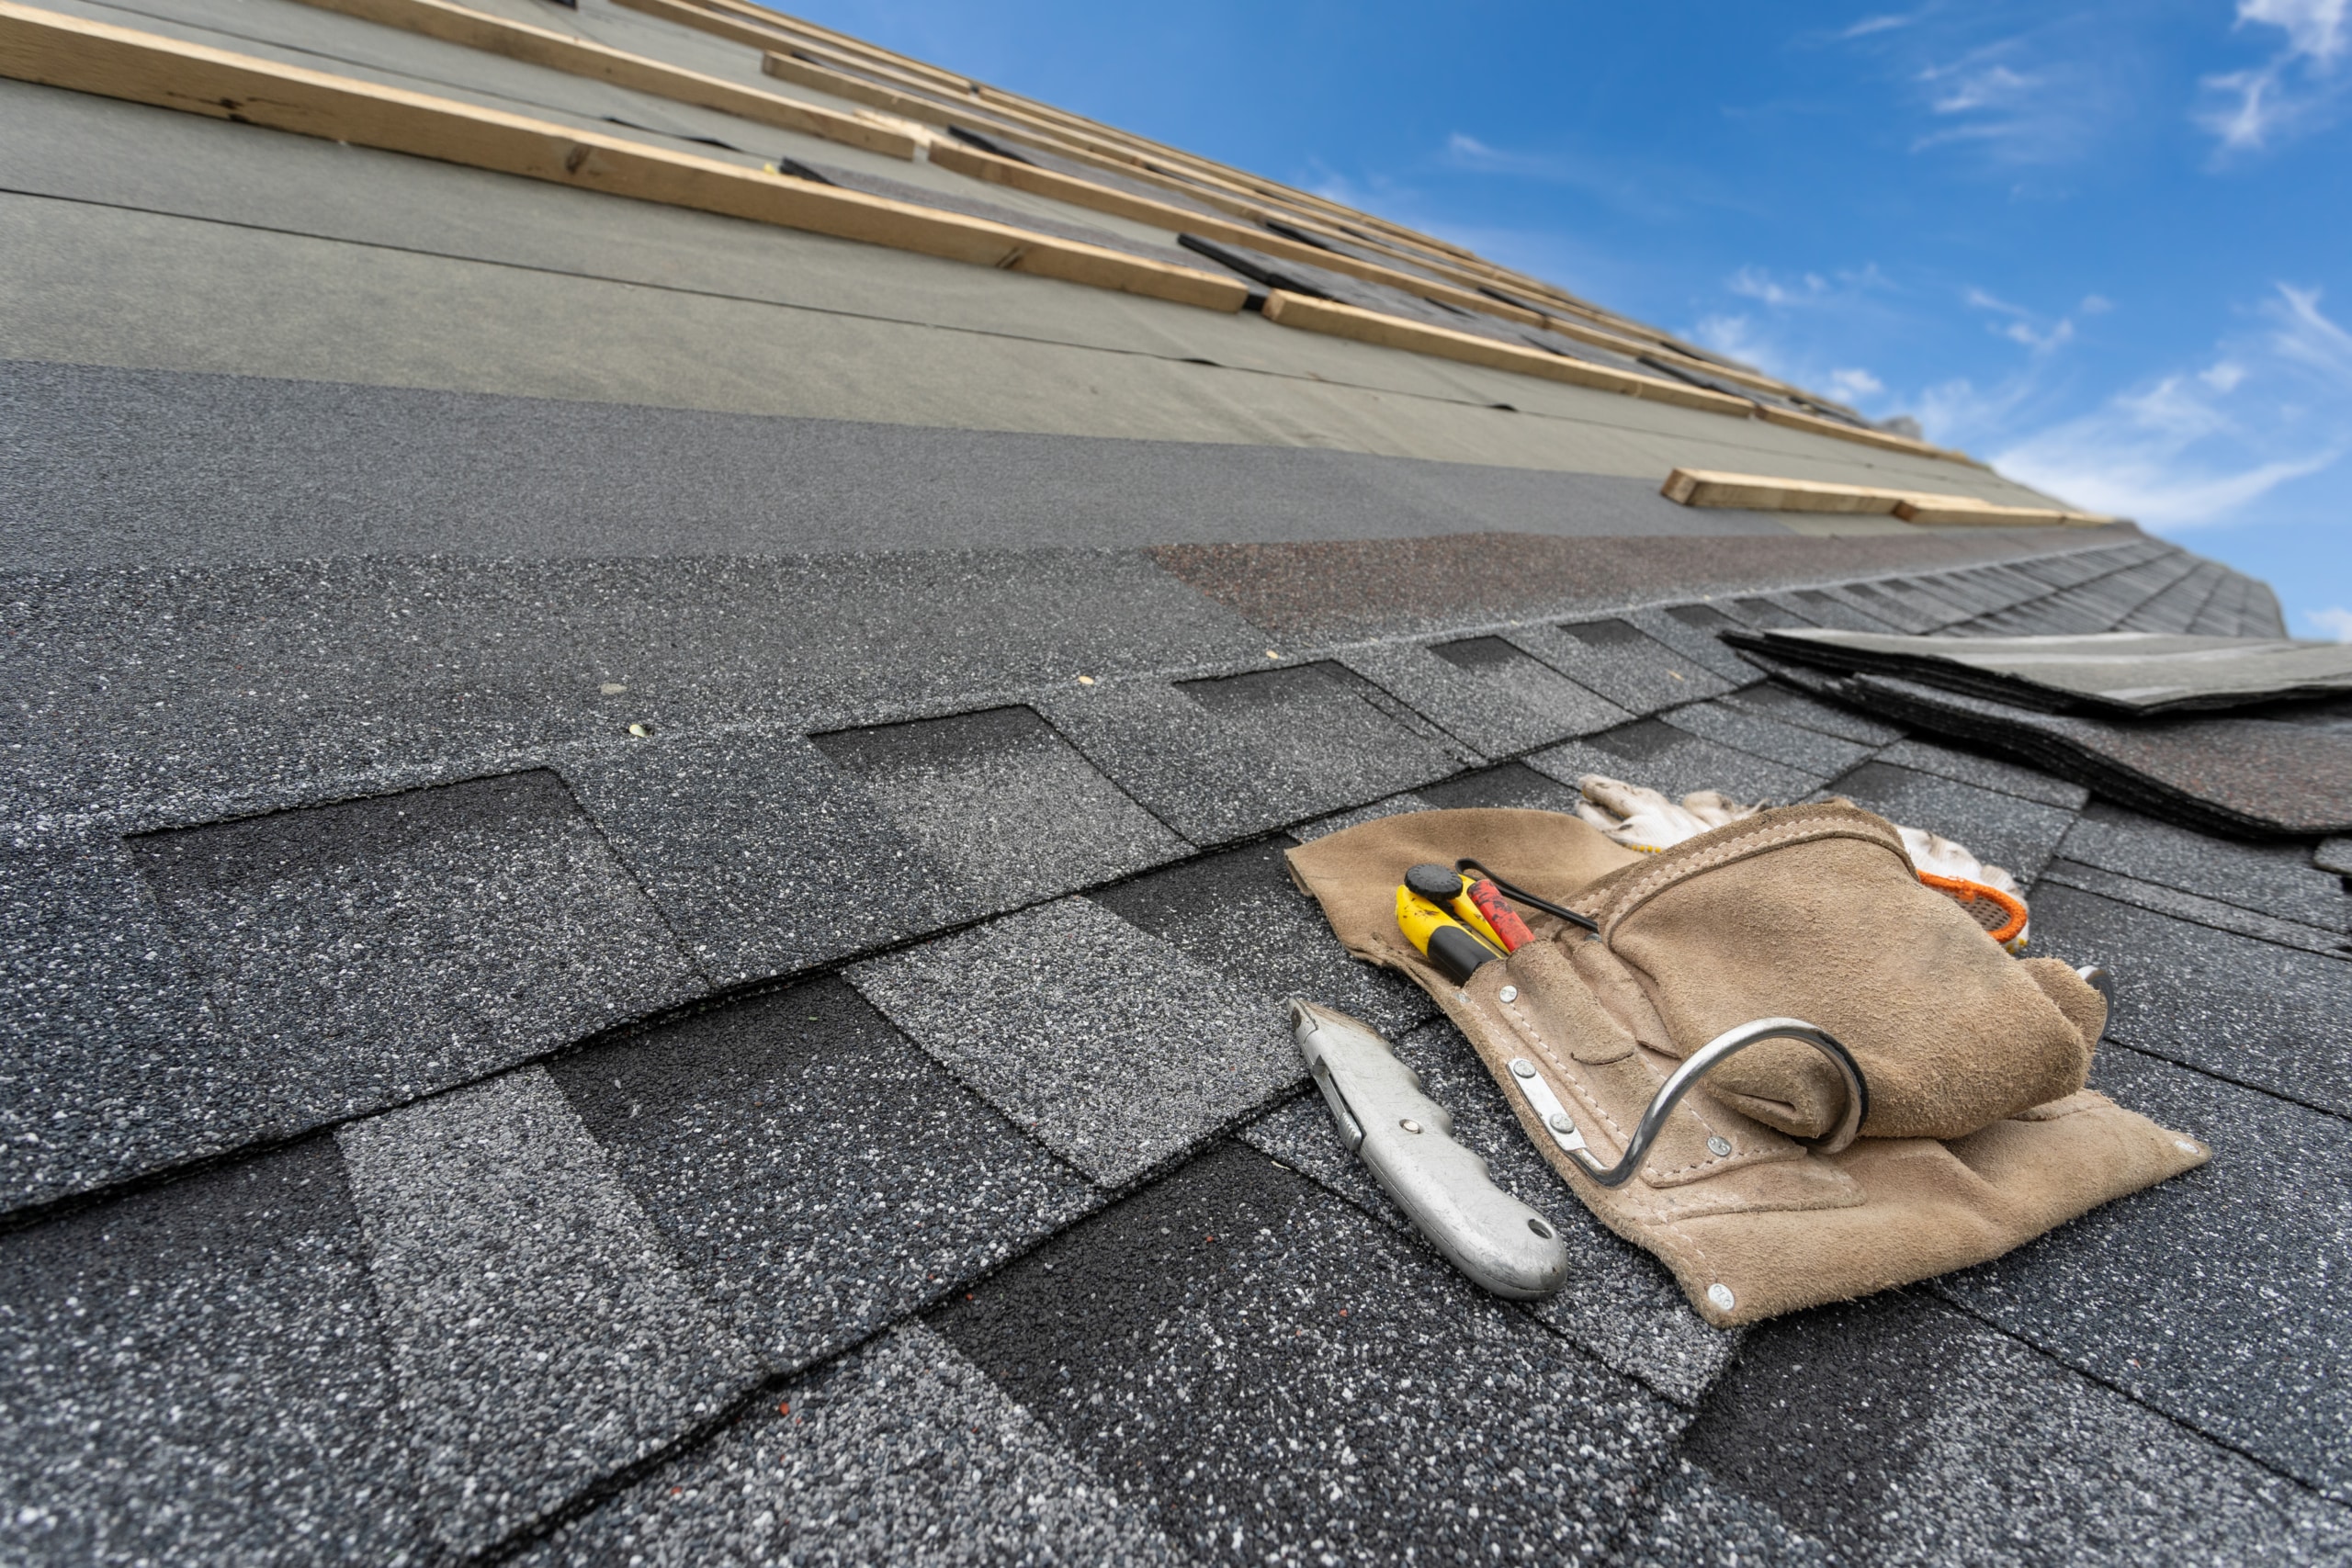 BP Builder Company in CT | Roofer, Roof Replacement, CT Roofing Company & General Contractor CT